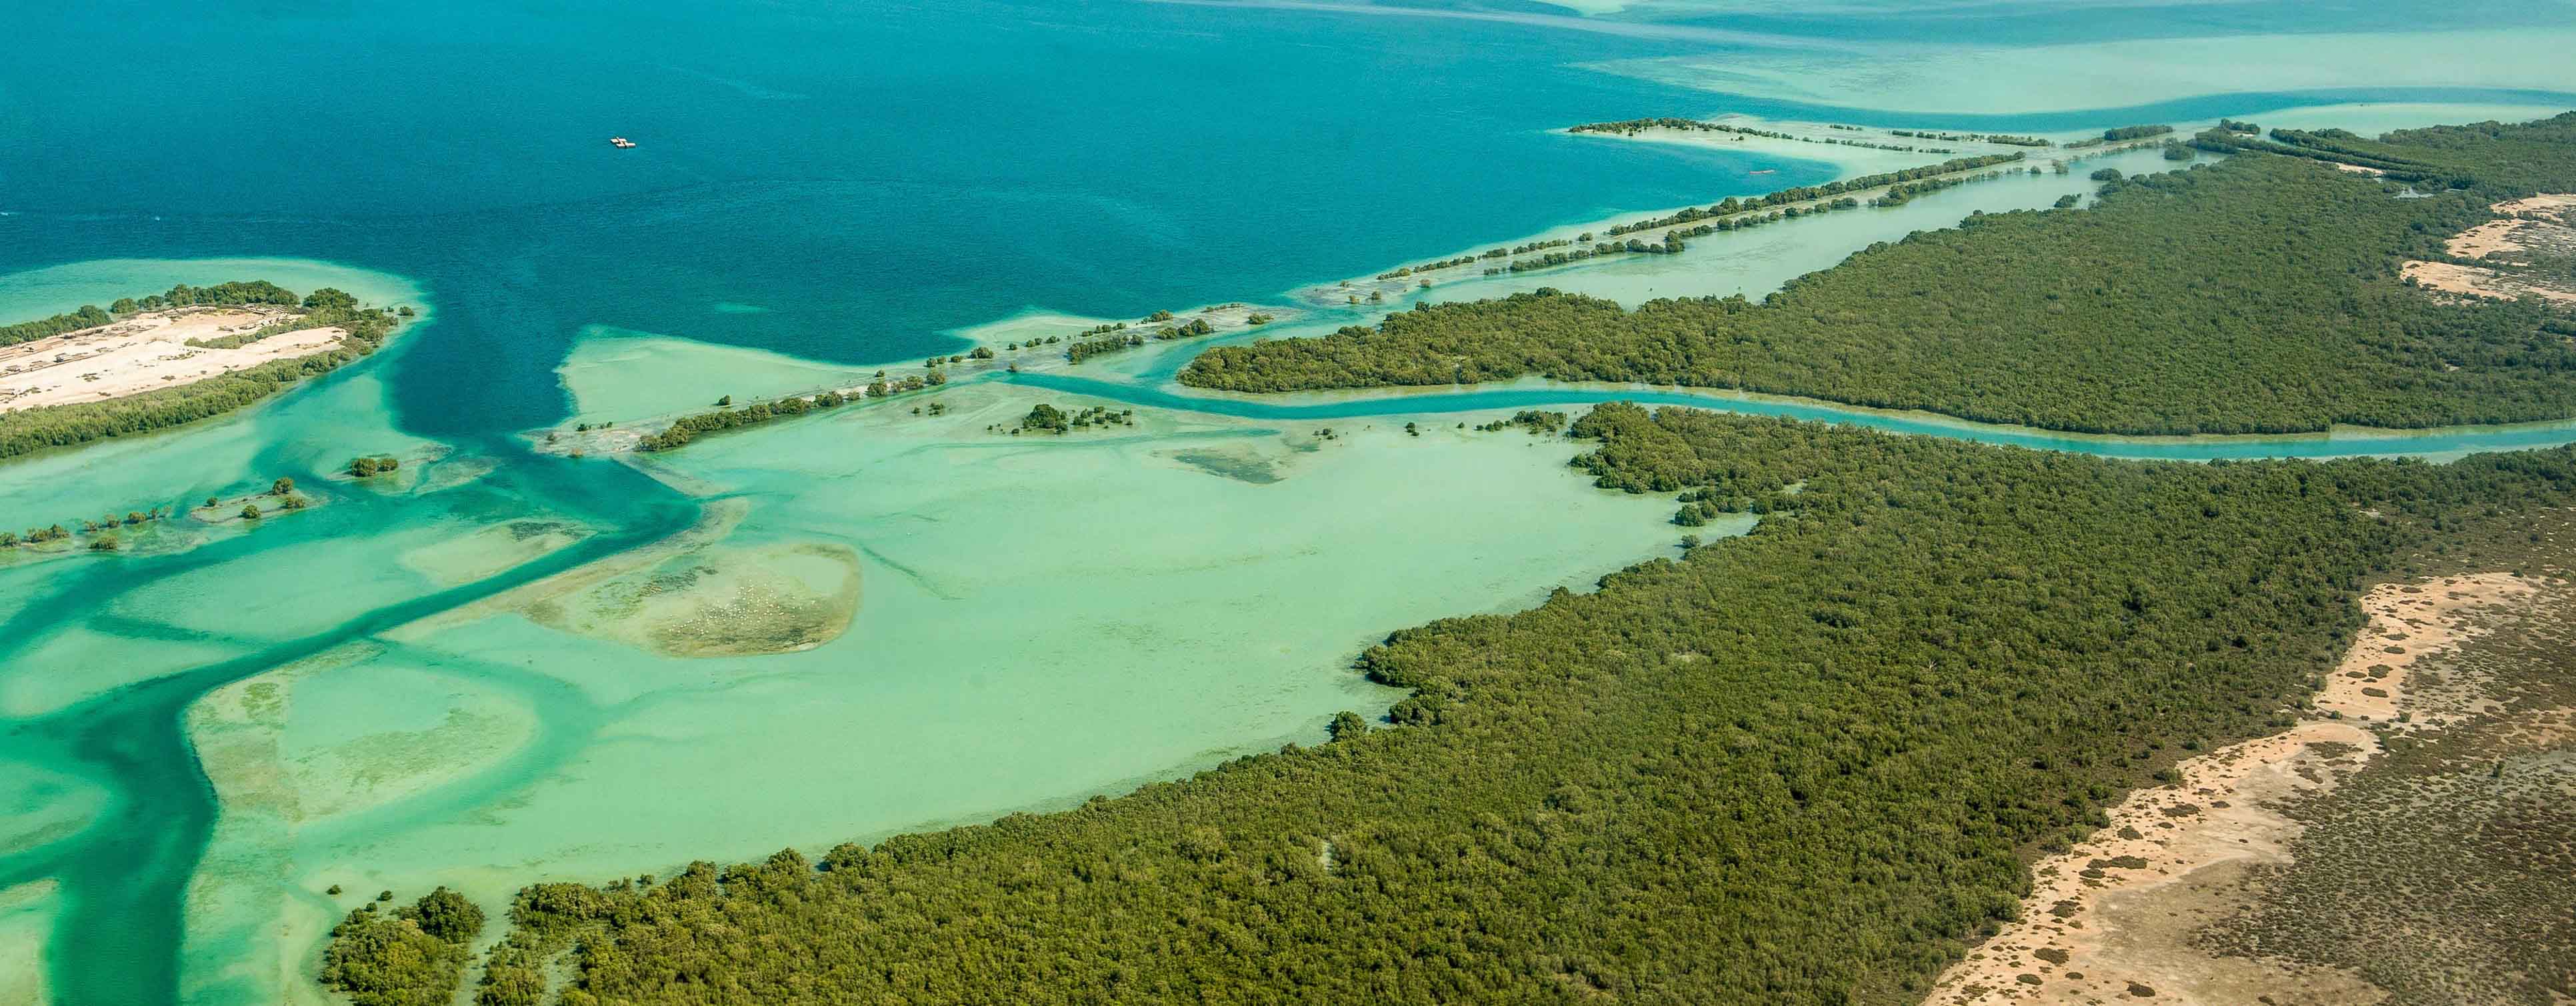 Mangrove Restoration: Challenges and Opportunities